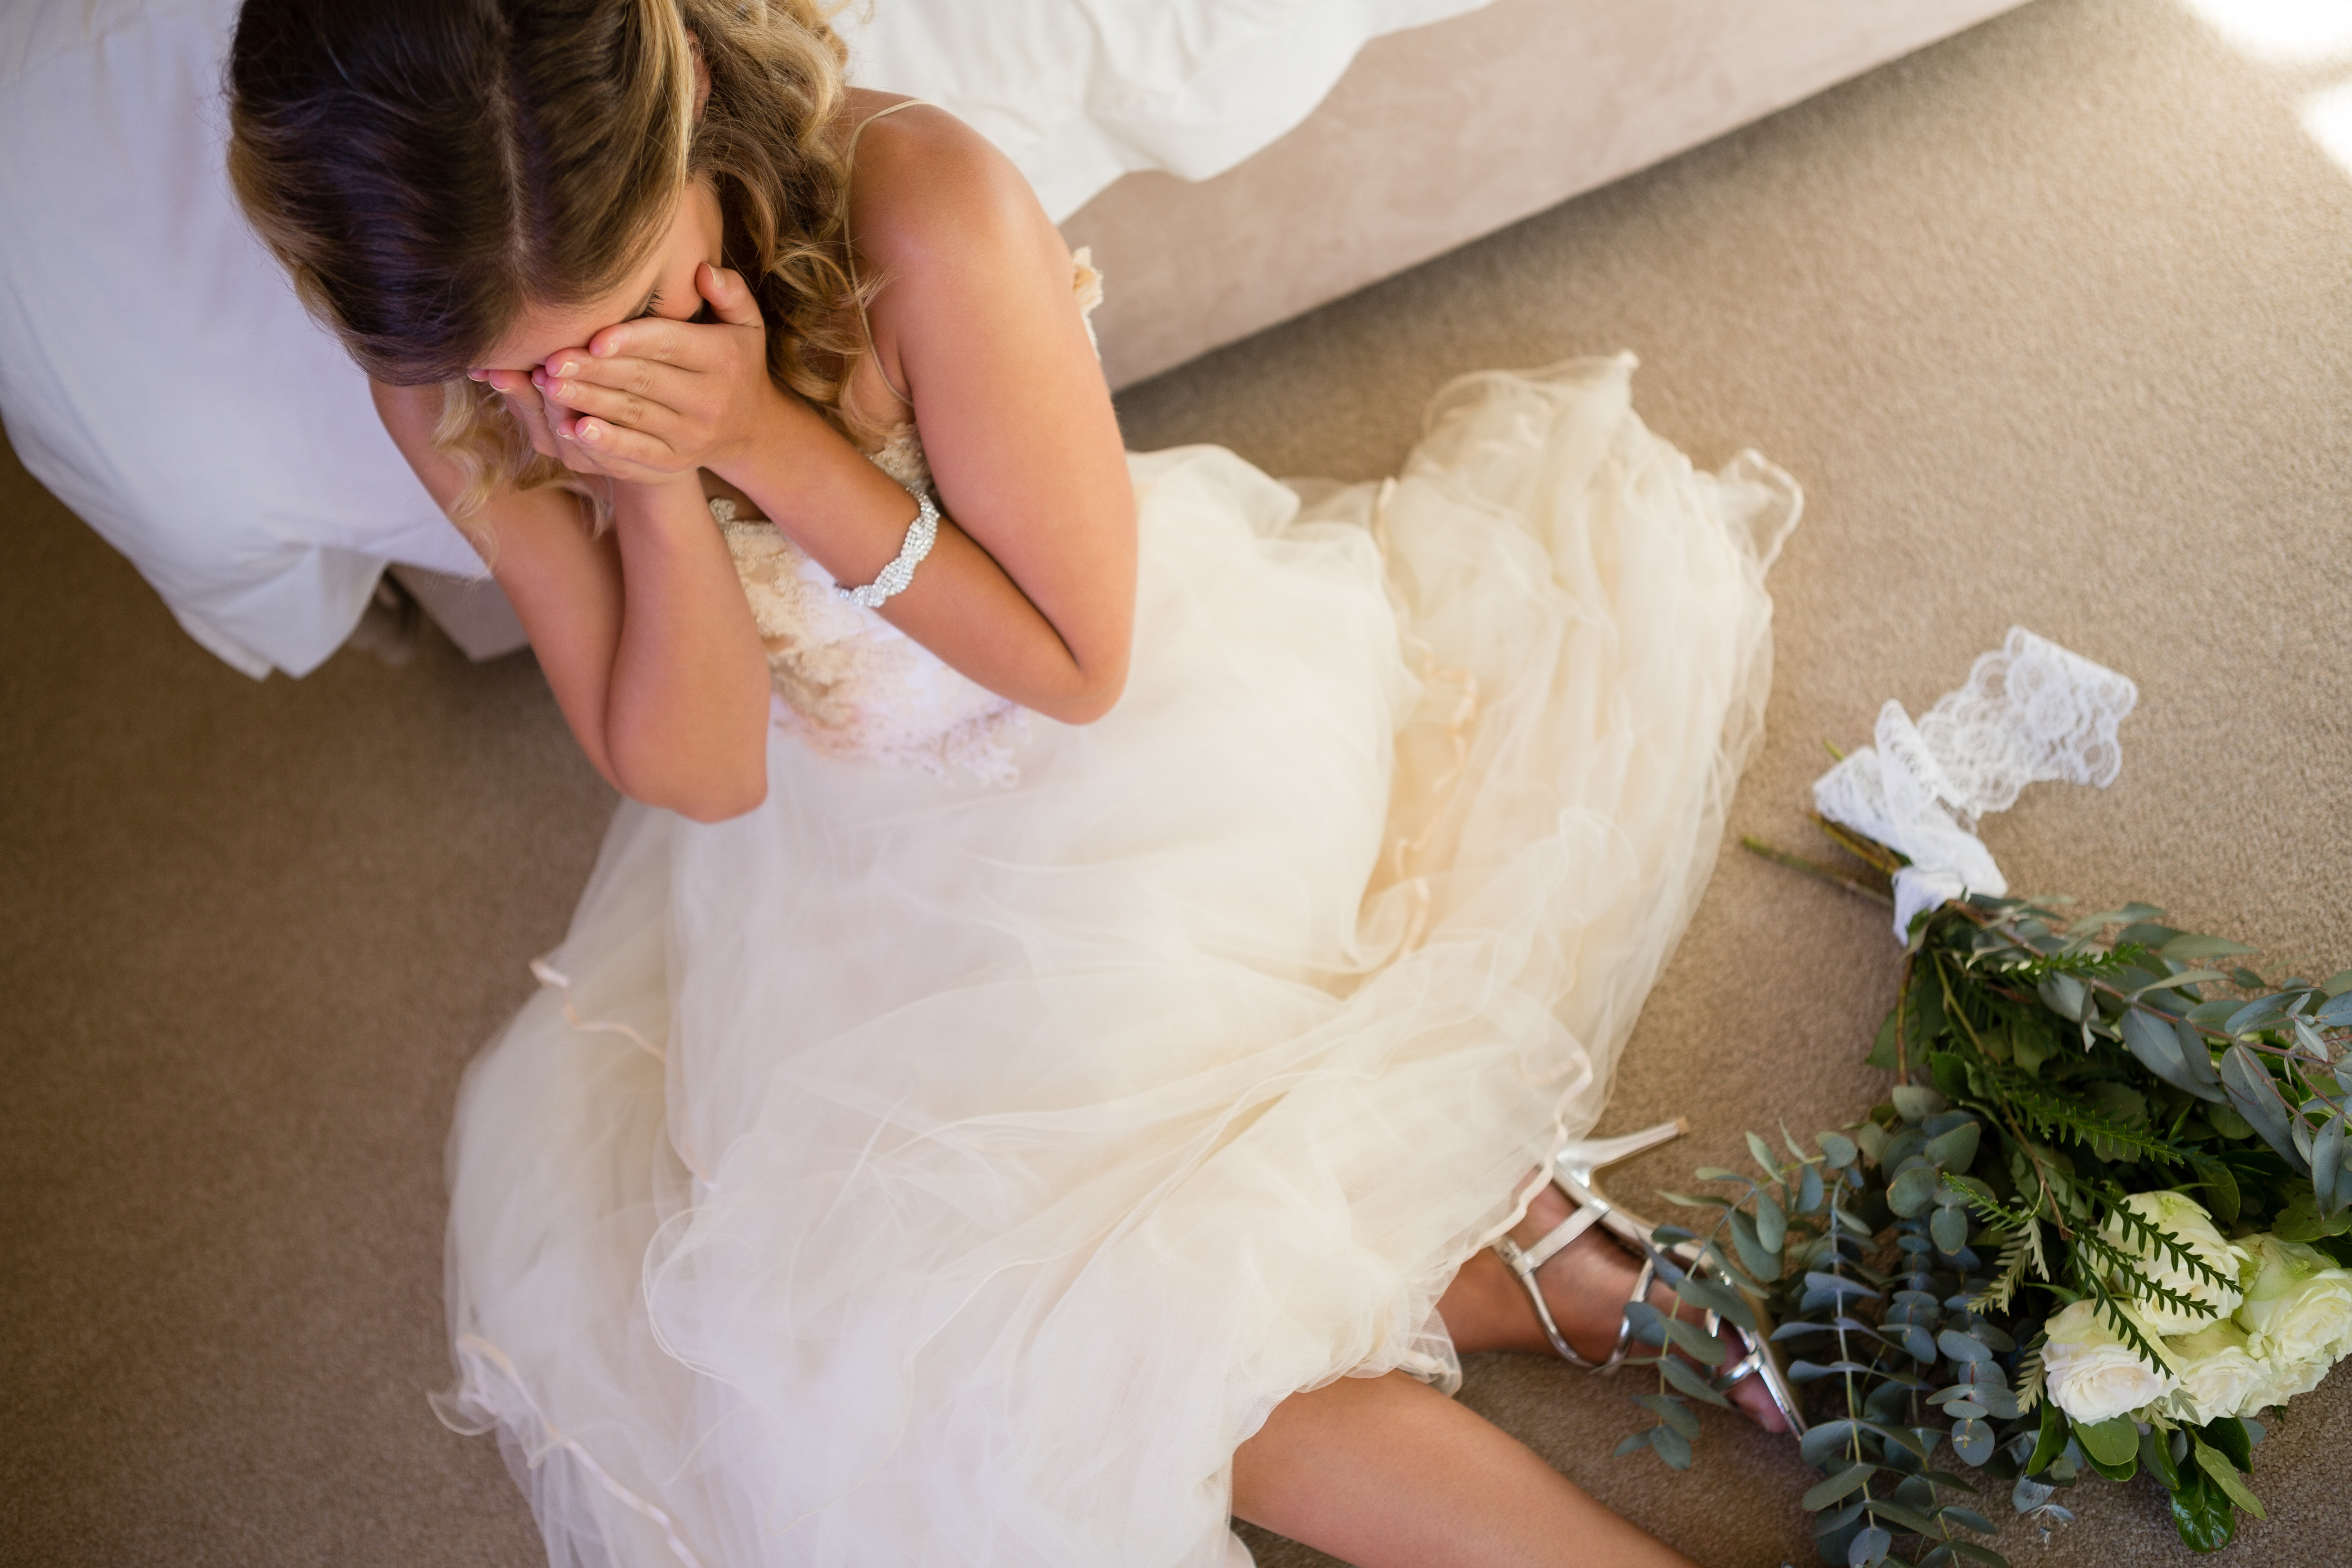 A bride is crying | Source: Shutterstock